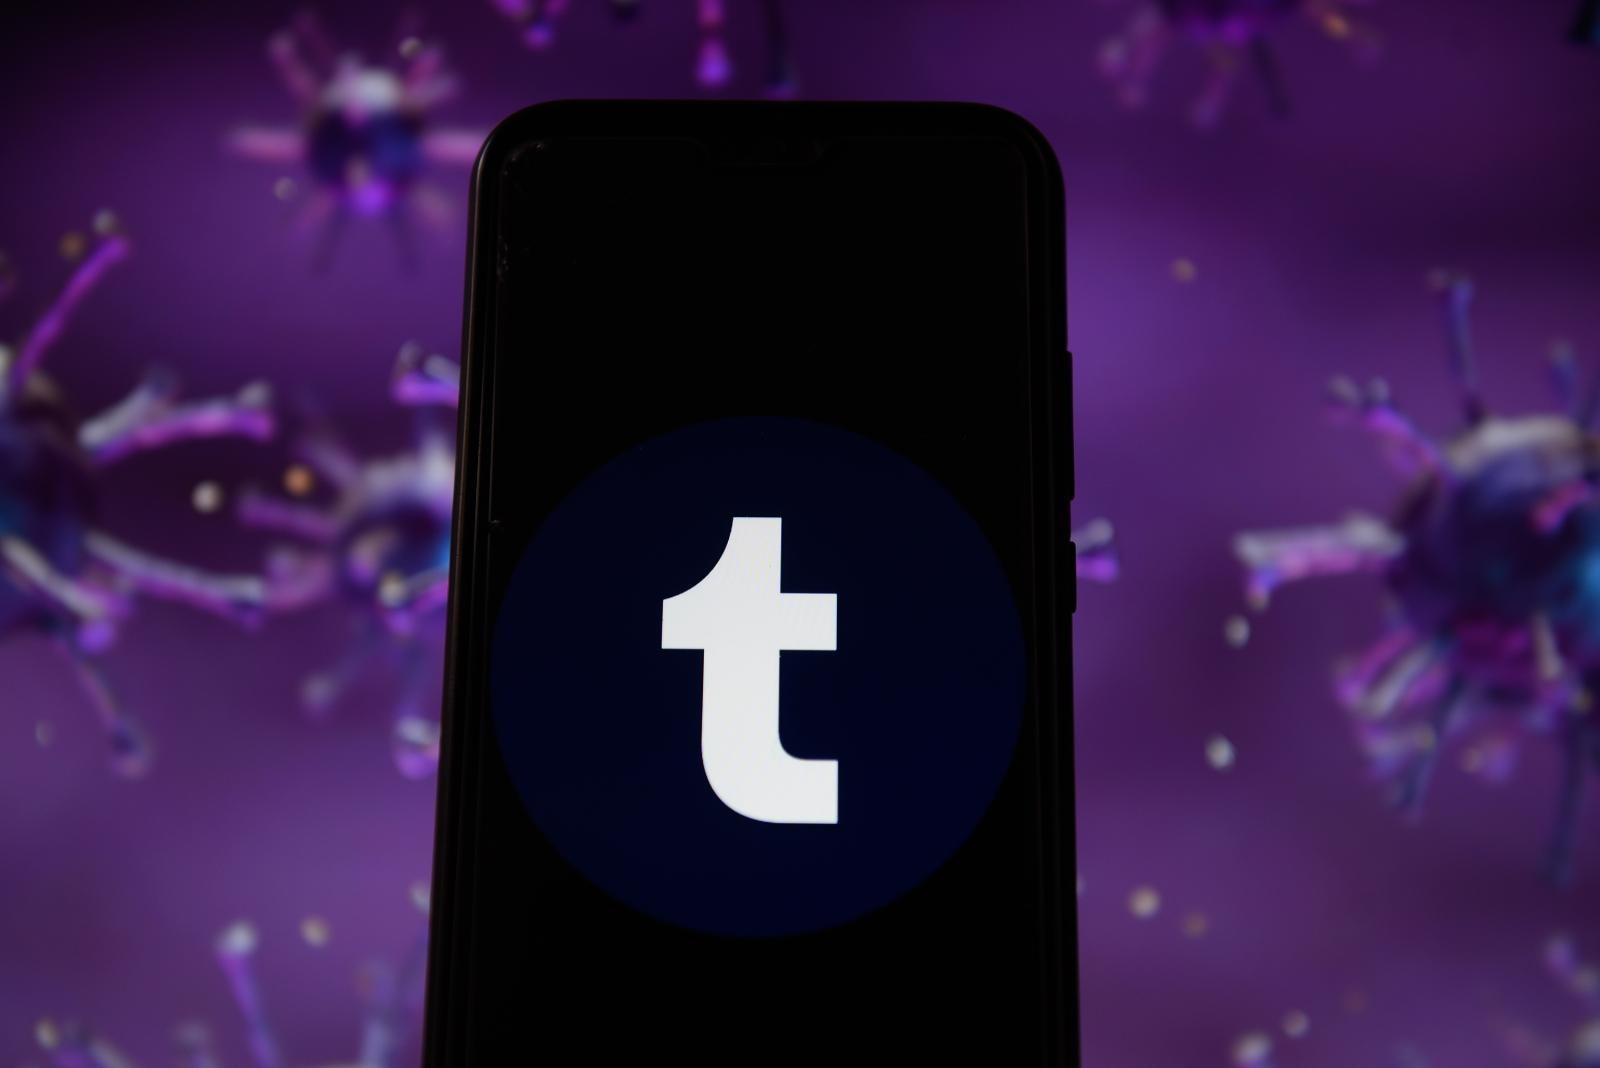 Tumblr’s ‘fediverse’ integration is still being worked on, says owner and Automattic CEO Matt Mullenweg